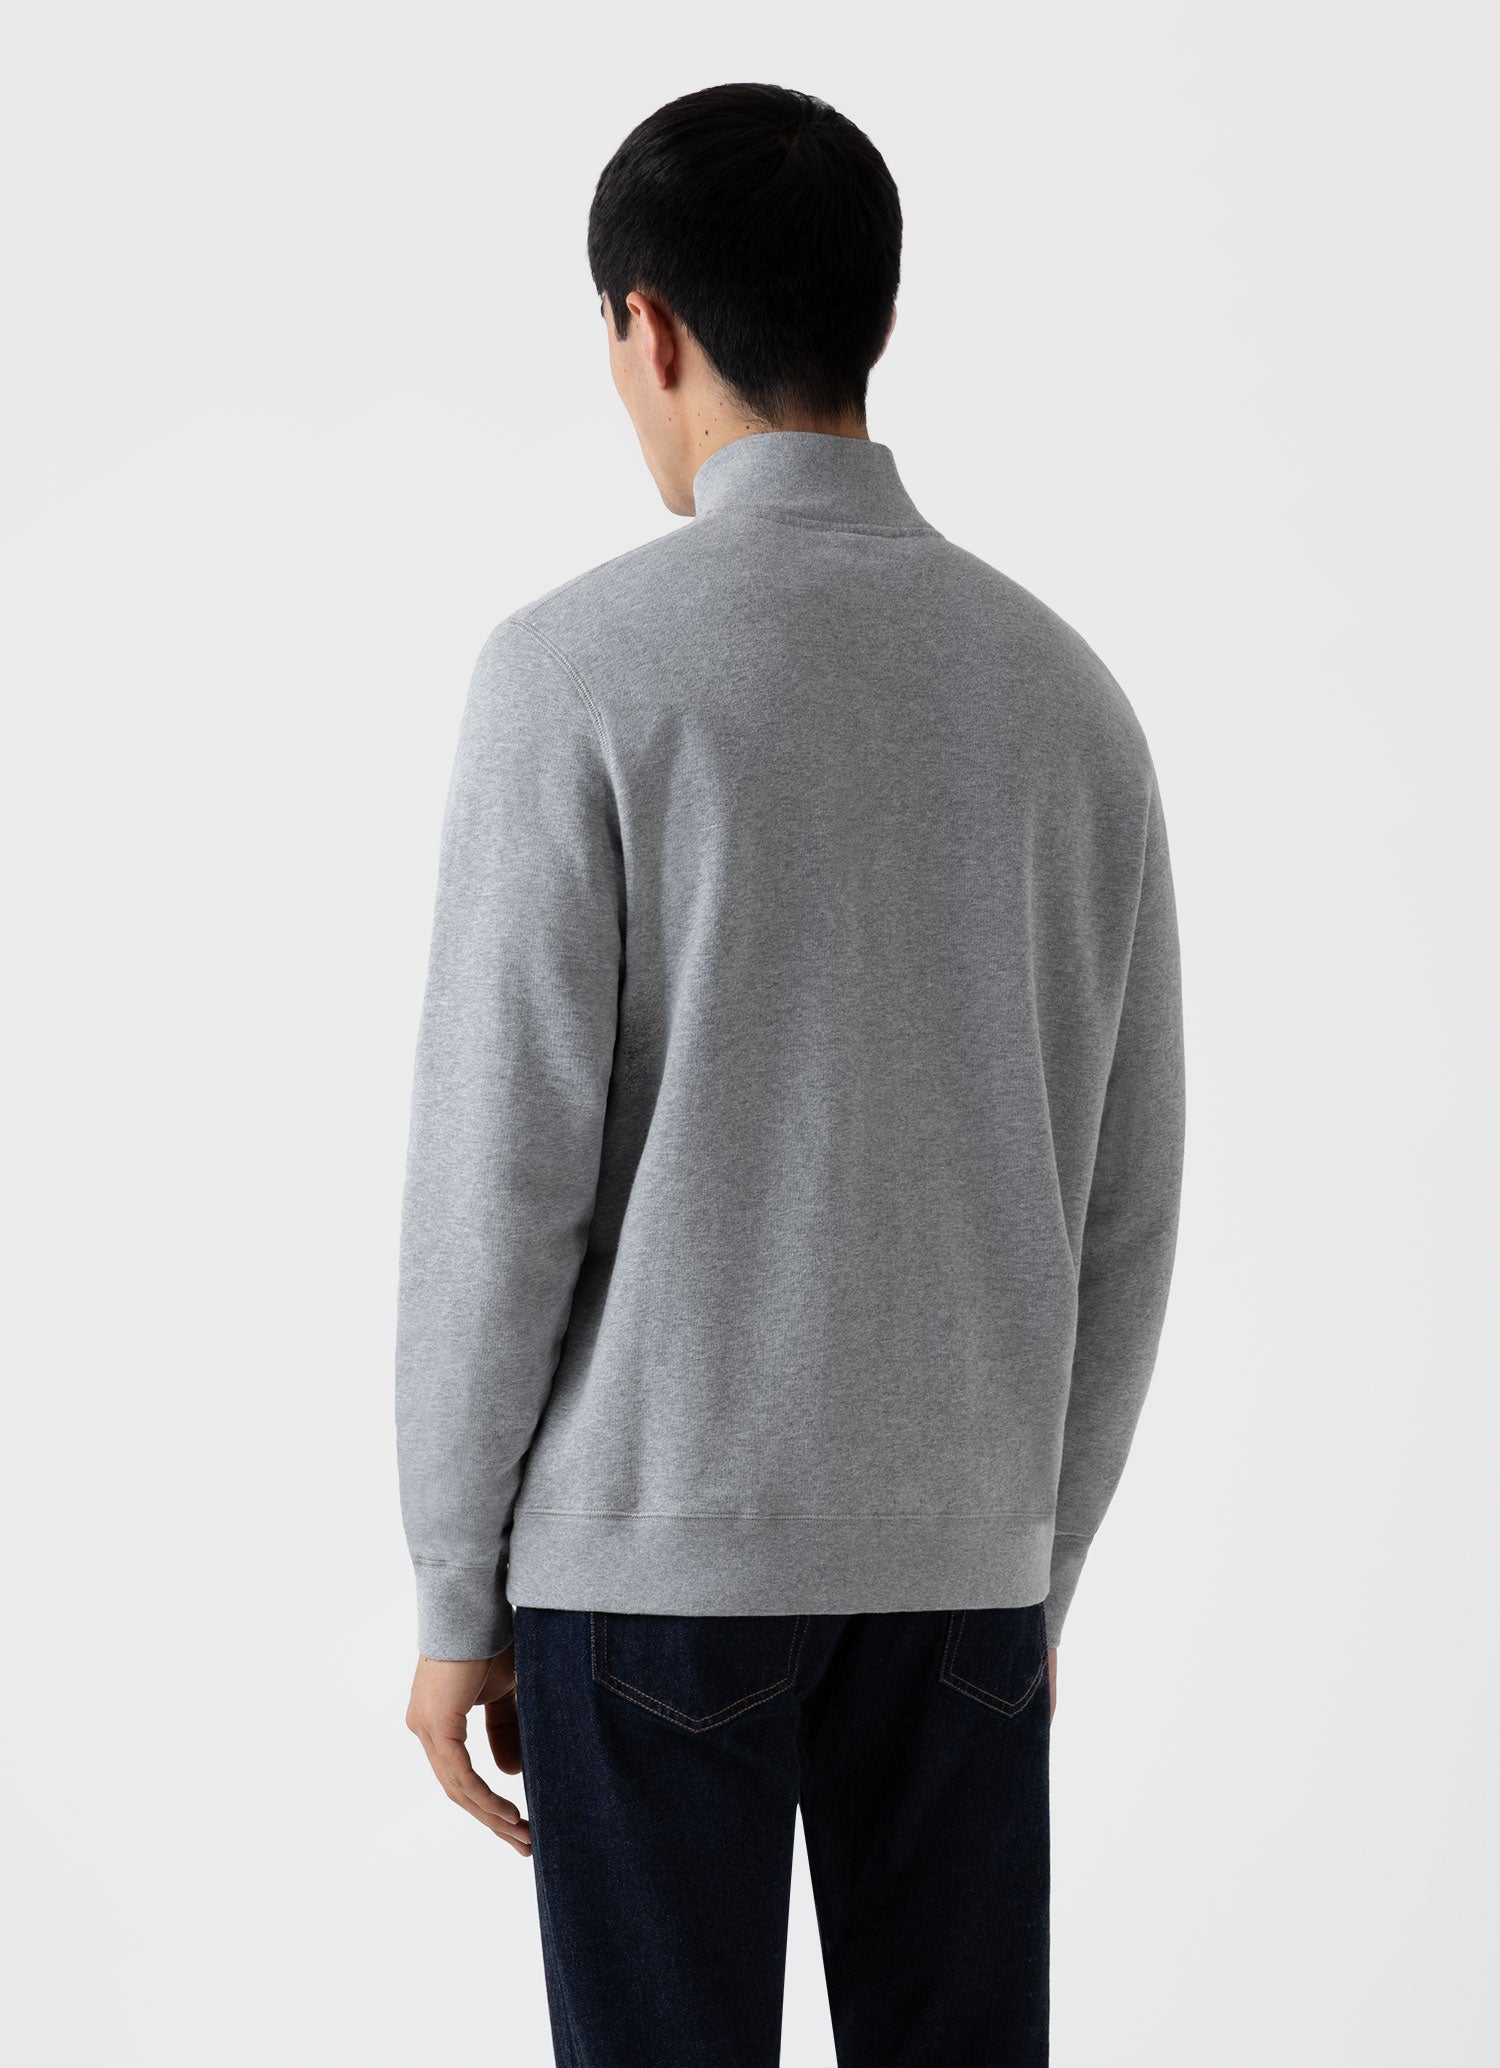 NEW限定品】 HENLY Channel Back トップス NECK SWEAT HALFSLEEVE 